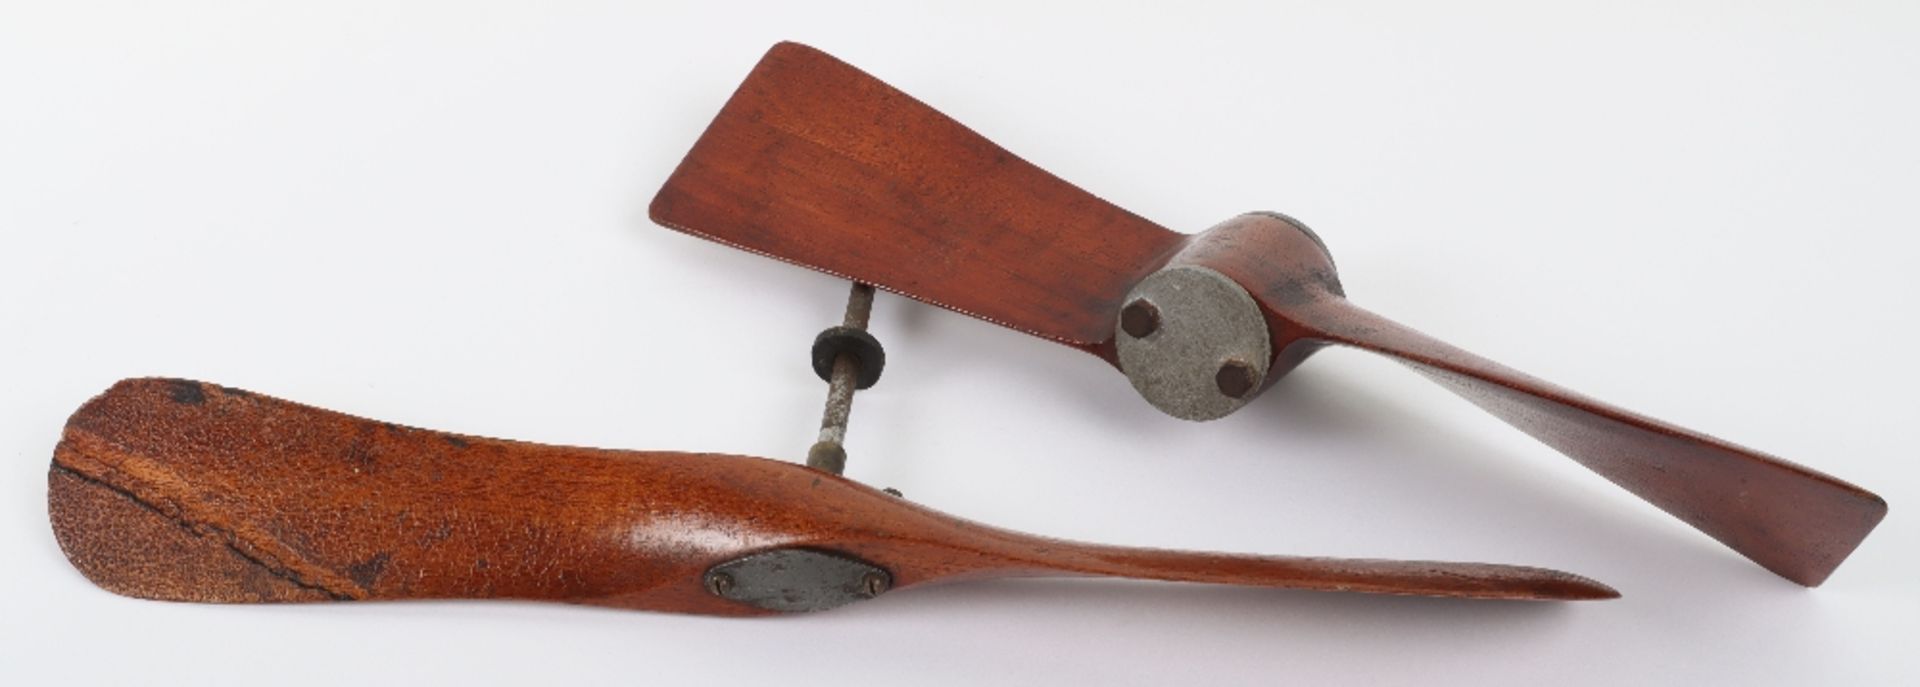 Two Small Wooden Propellers - Image 3 of 4